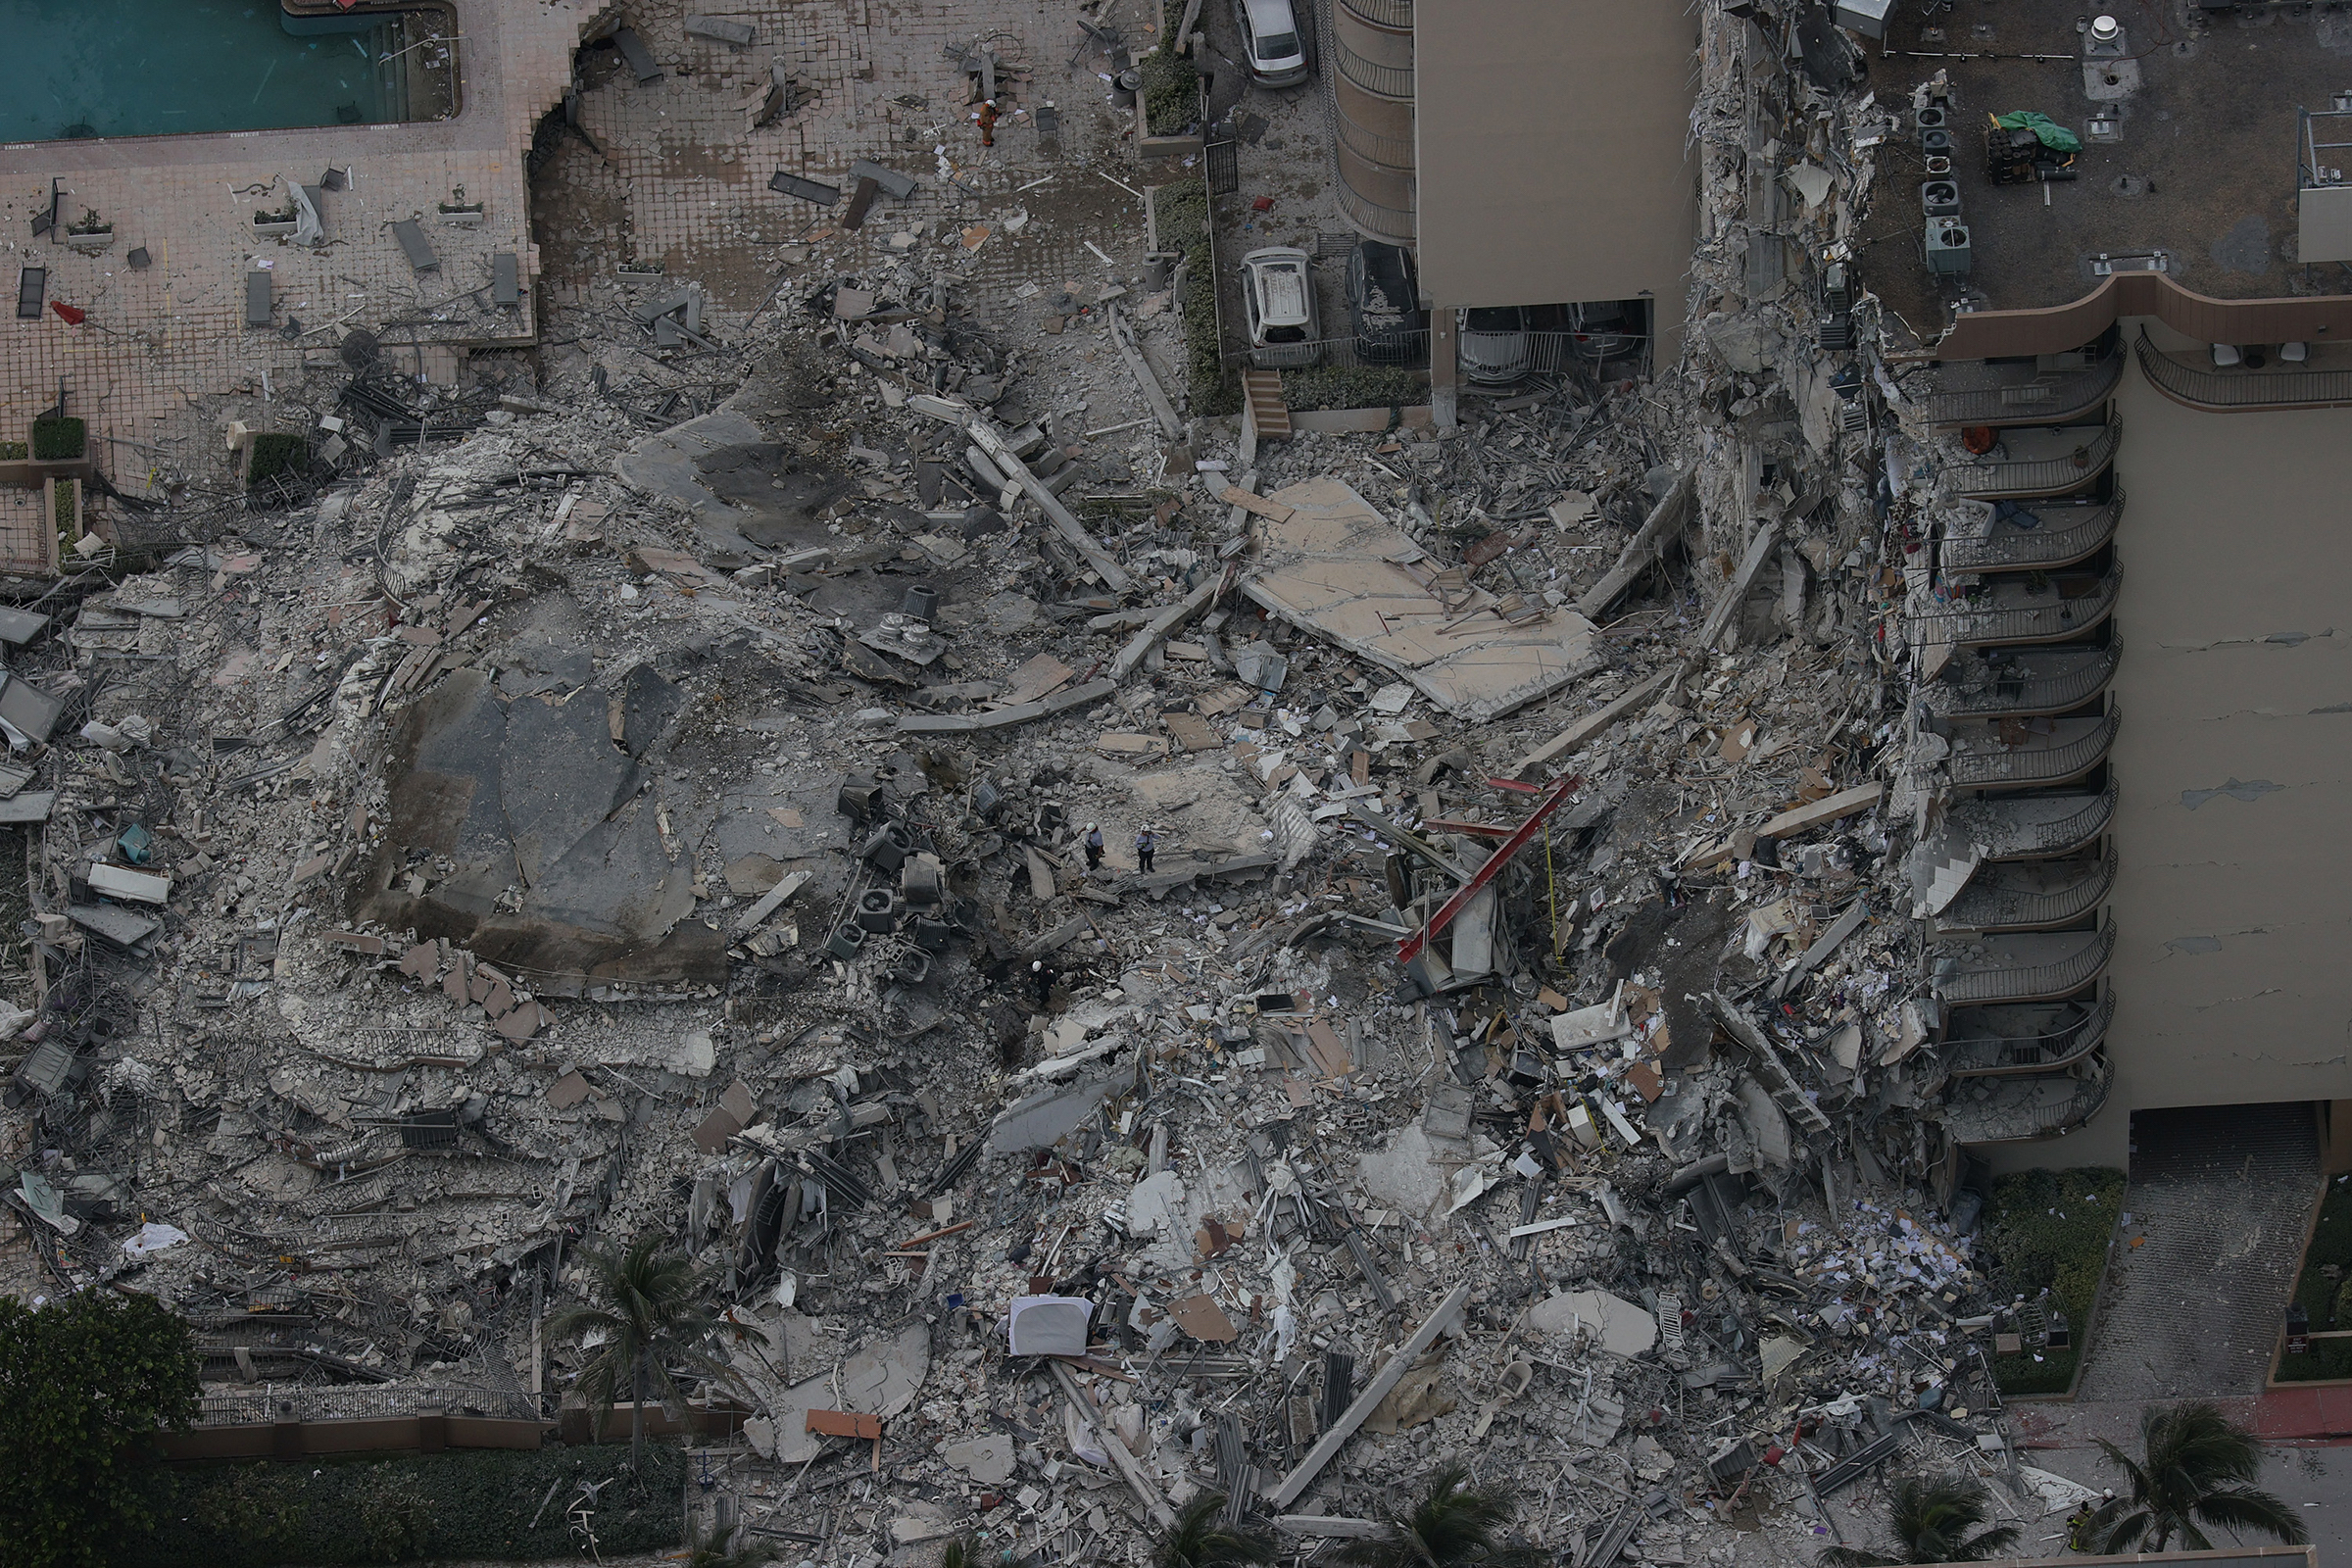 Search-and-rescue personnel work in the rubble of the 12-story condo tower that partially collapsed in Surfside, Fla., a suburb of Miami, on June 24. Ninety-eight people died. (Joe Raedle—Getty Images)